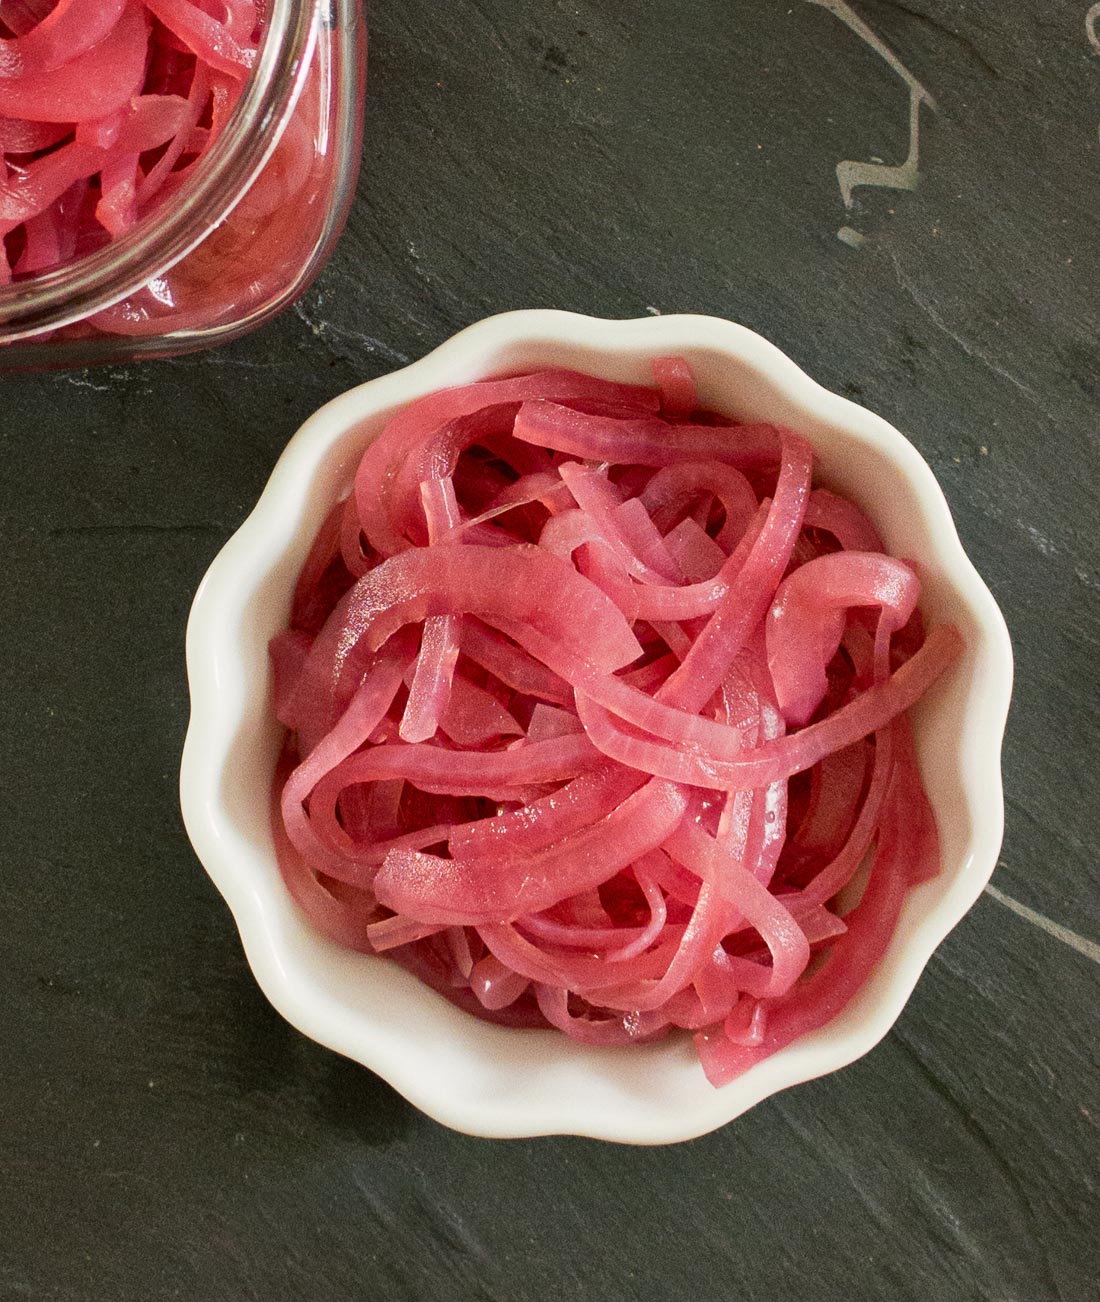 Use these Yucatan pickled onions on tacos, burgers, sandwiches or just eat them out of the jar.